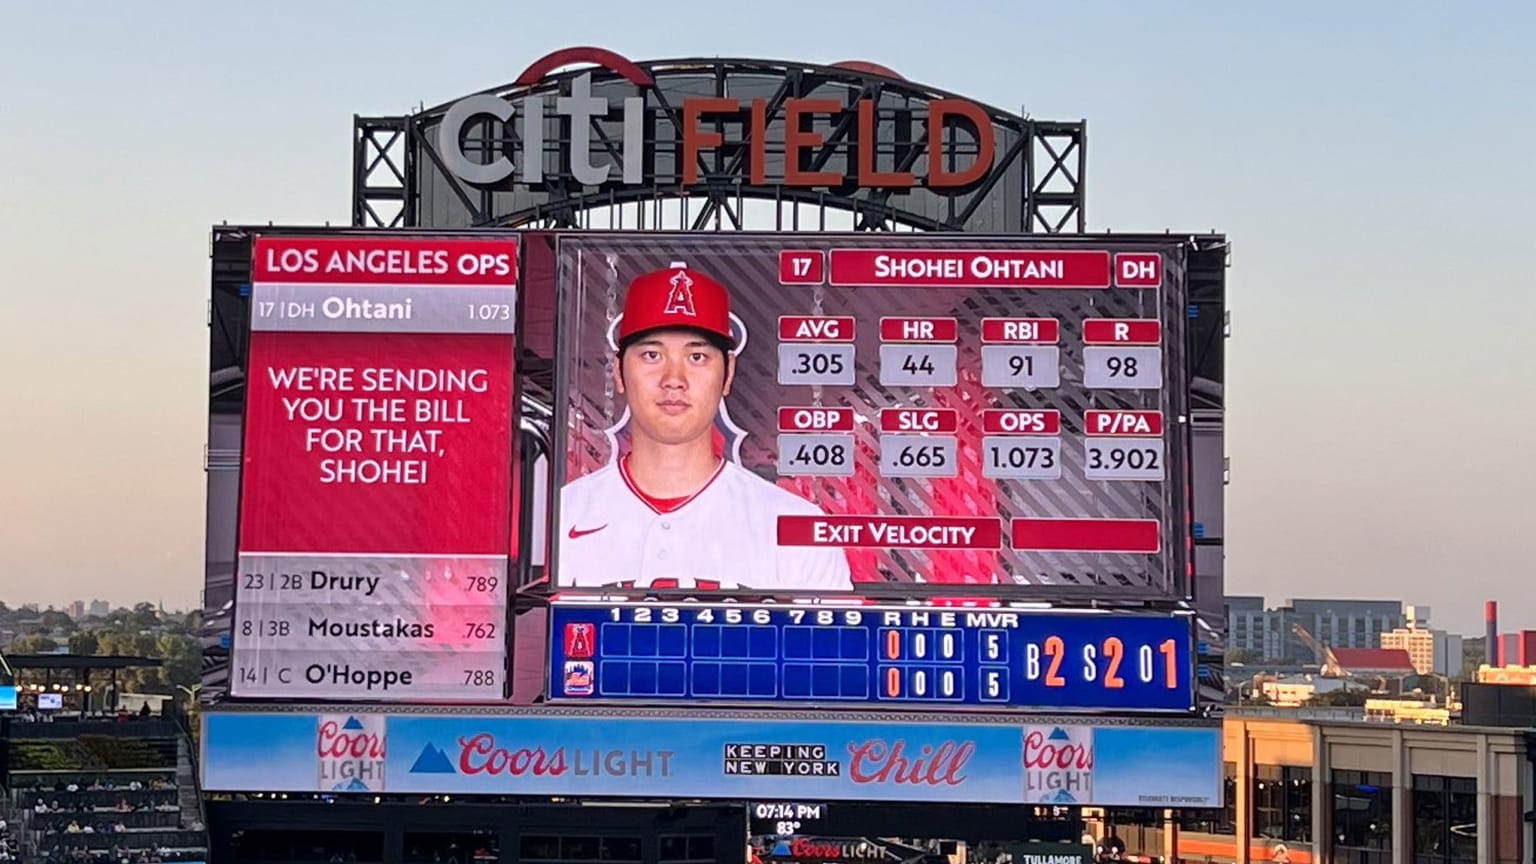 The Mets' main scoreboard is pictured with Shohei Ohtani batting